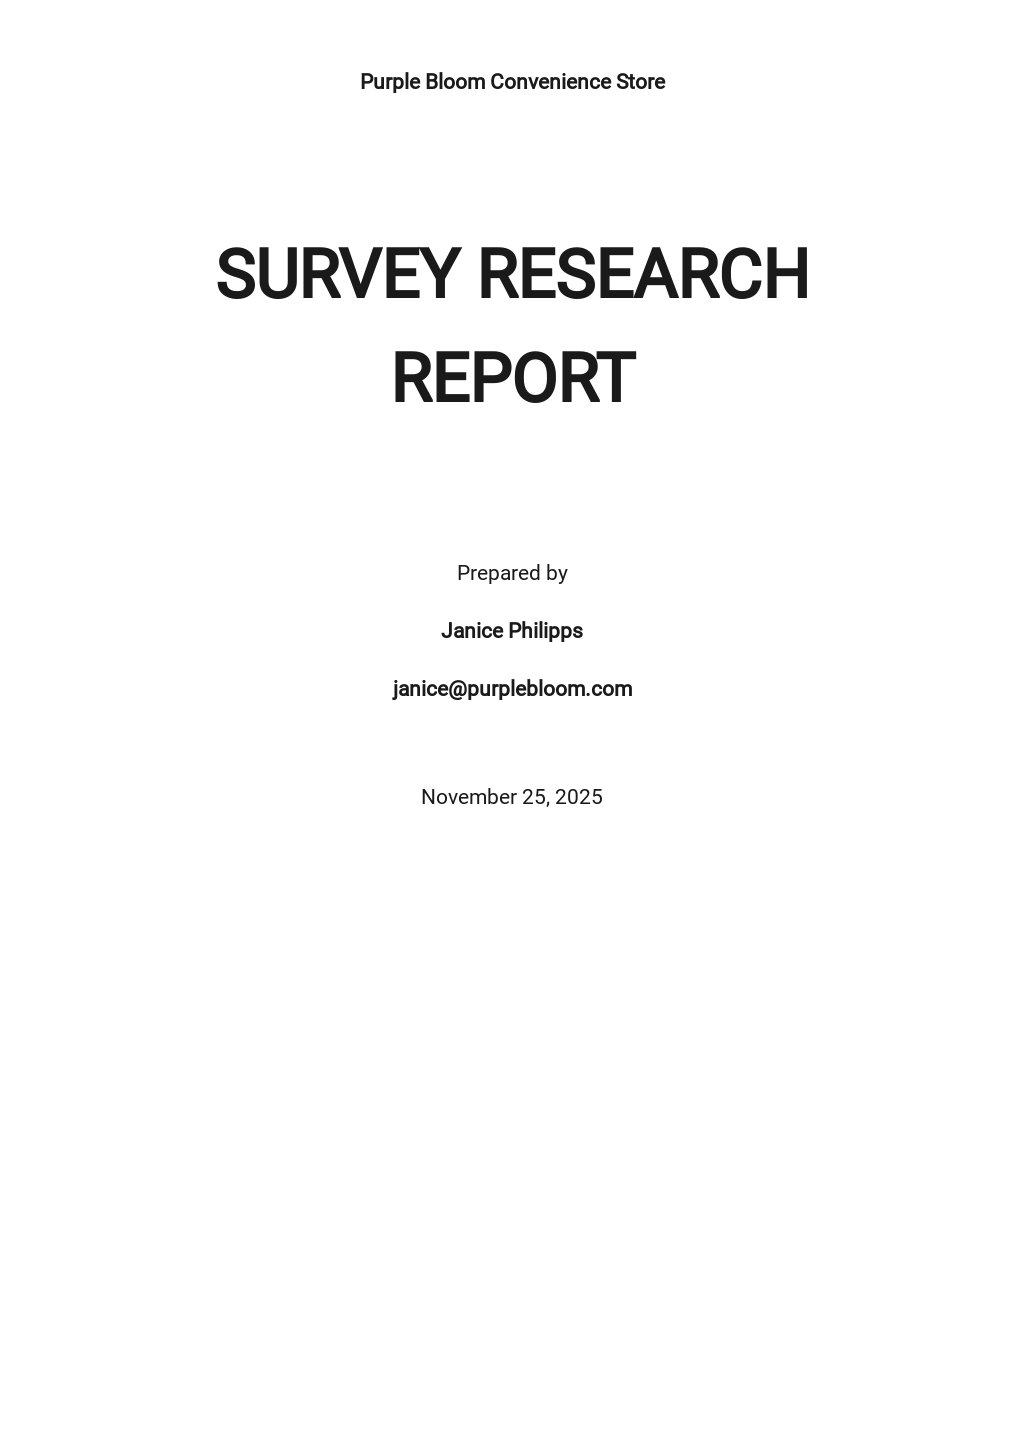 survey research report template